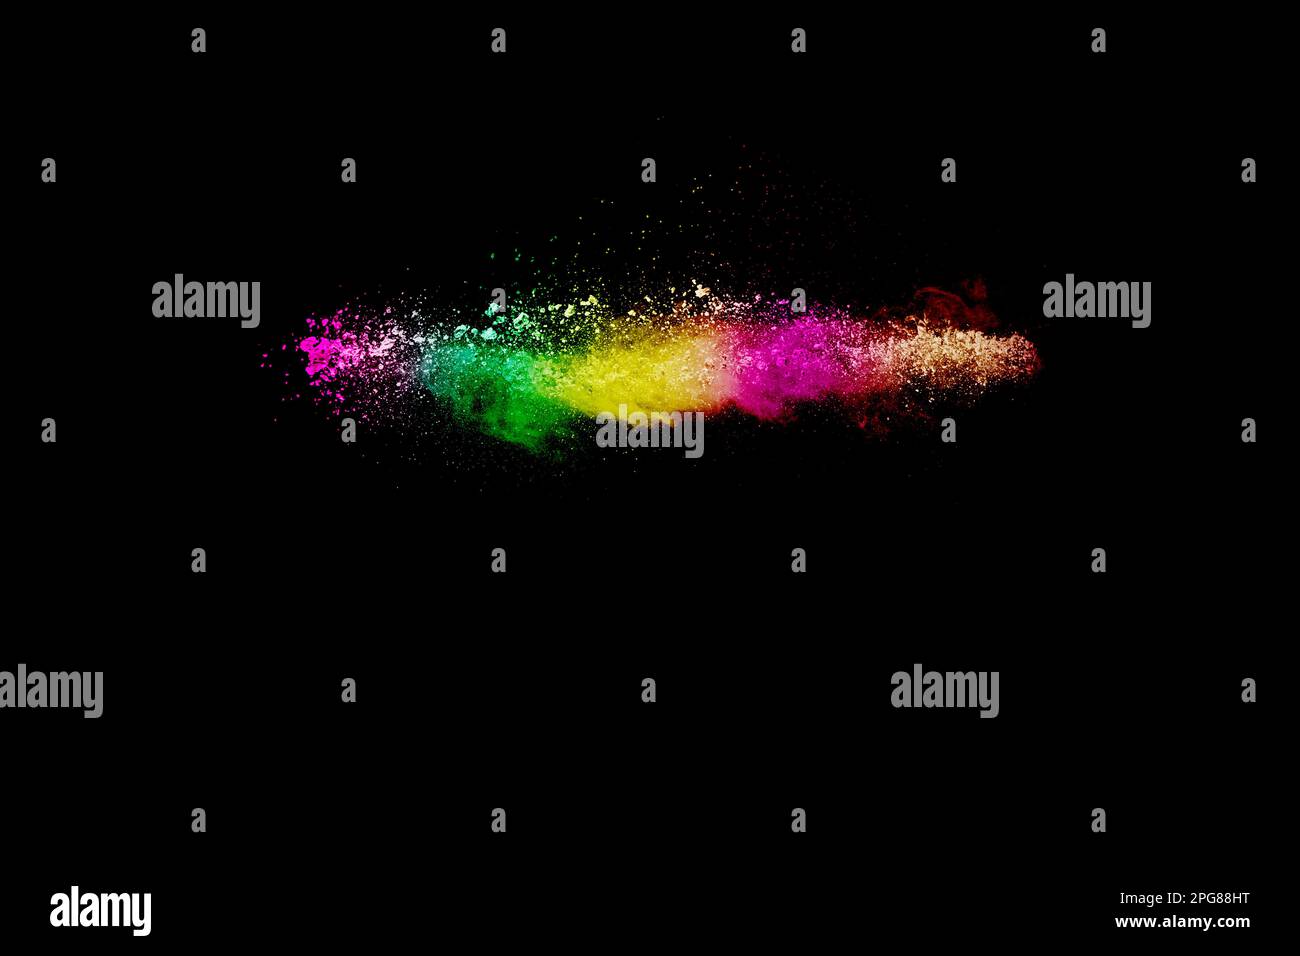 https://c8.alamy.com/comp/2PG88HT/abstract-multi-color-powder-explosion-on-black-background-freeze-motion-of-colorful-dust-particles-splash-painted-holi-2PG88HT.jpg